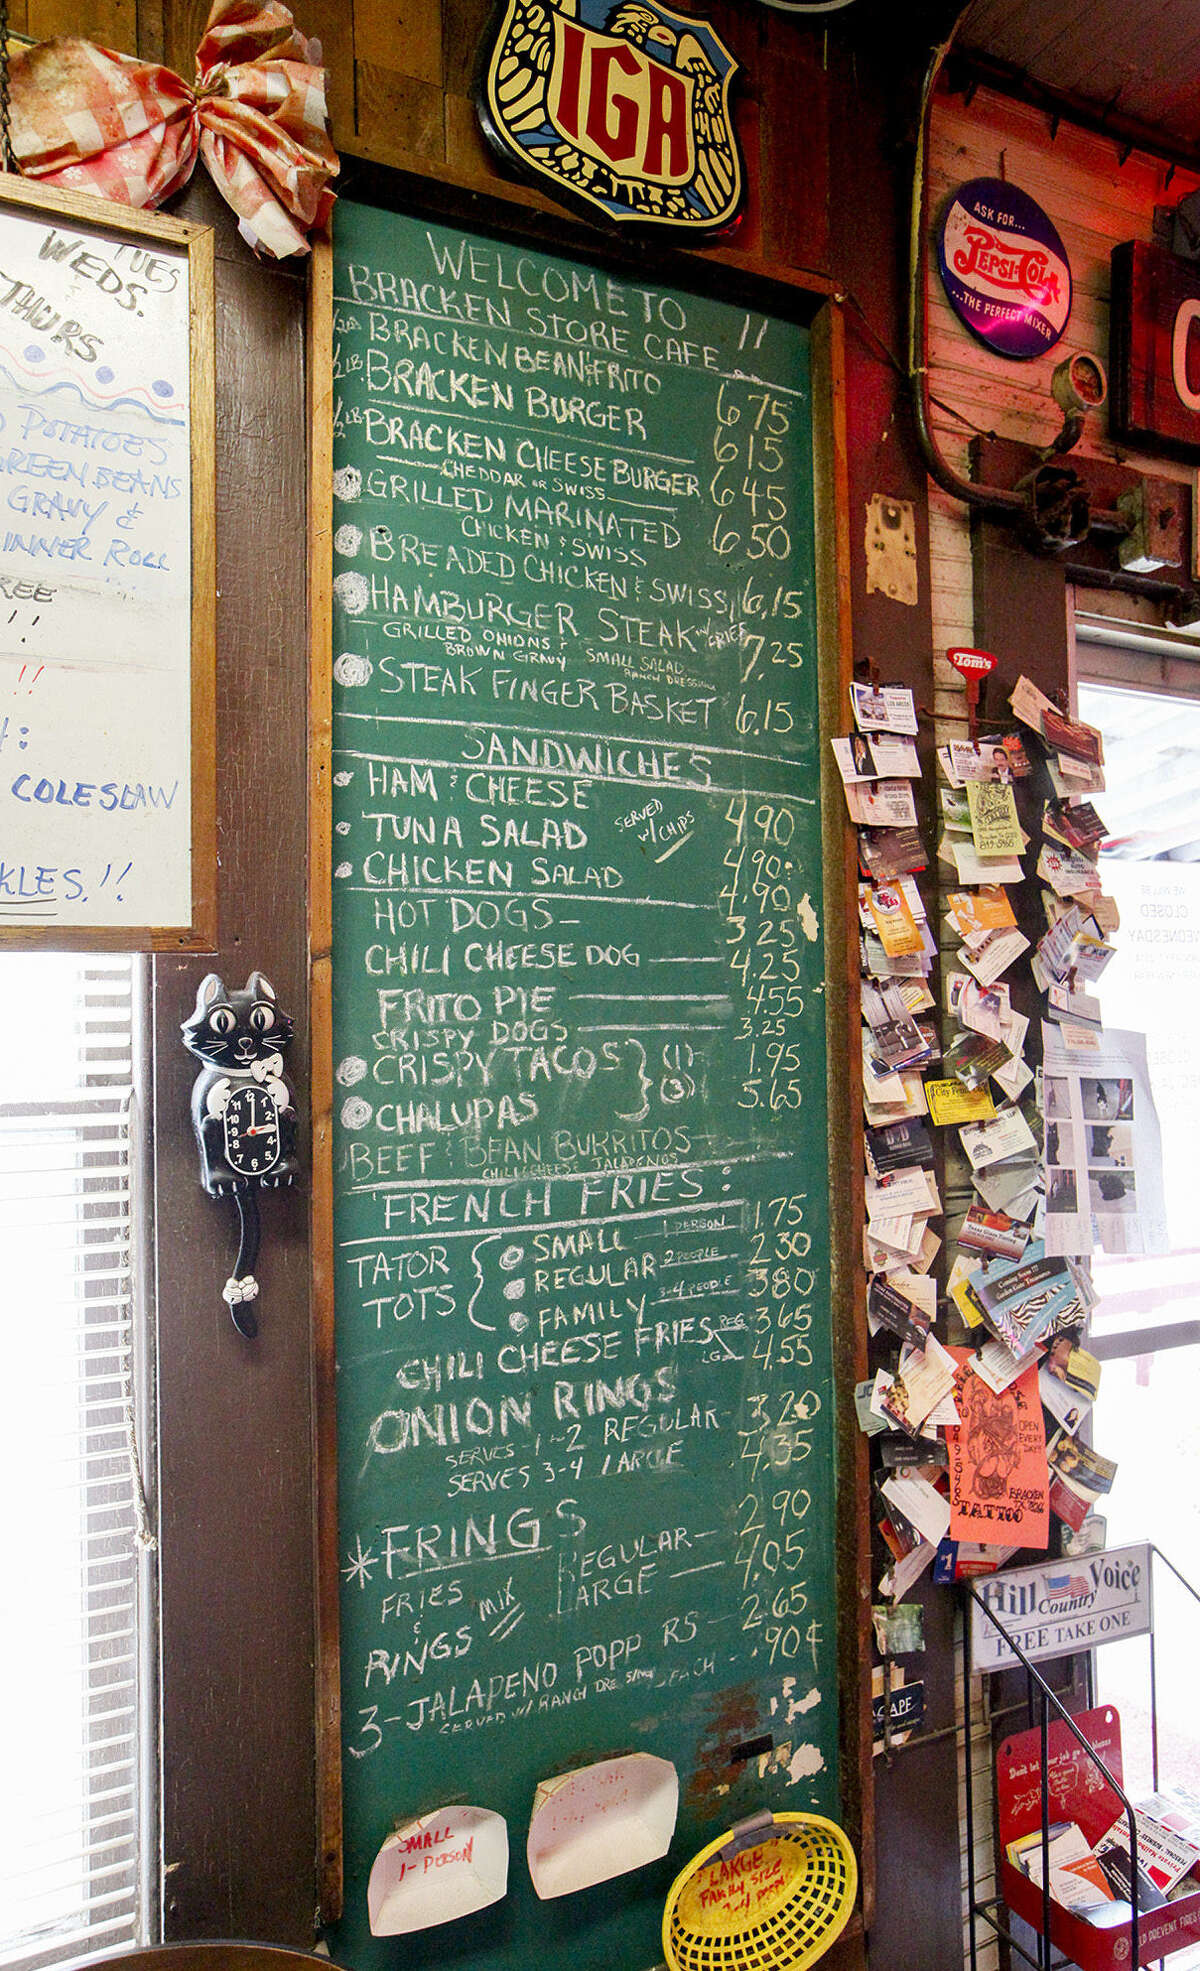 One of the wall menus at the Bracken Store Cafe lists every burger and lunch item its customers could want.